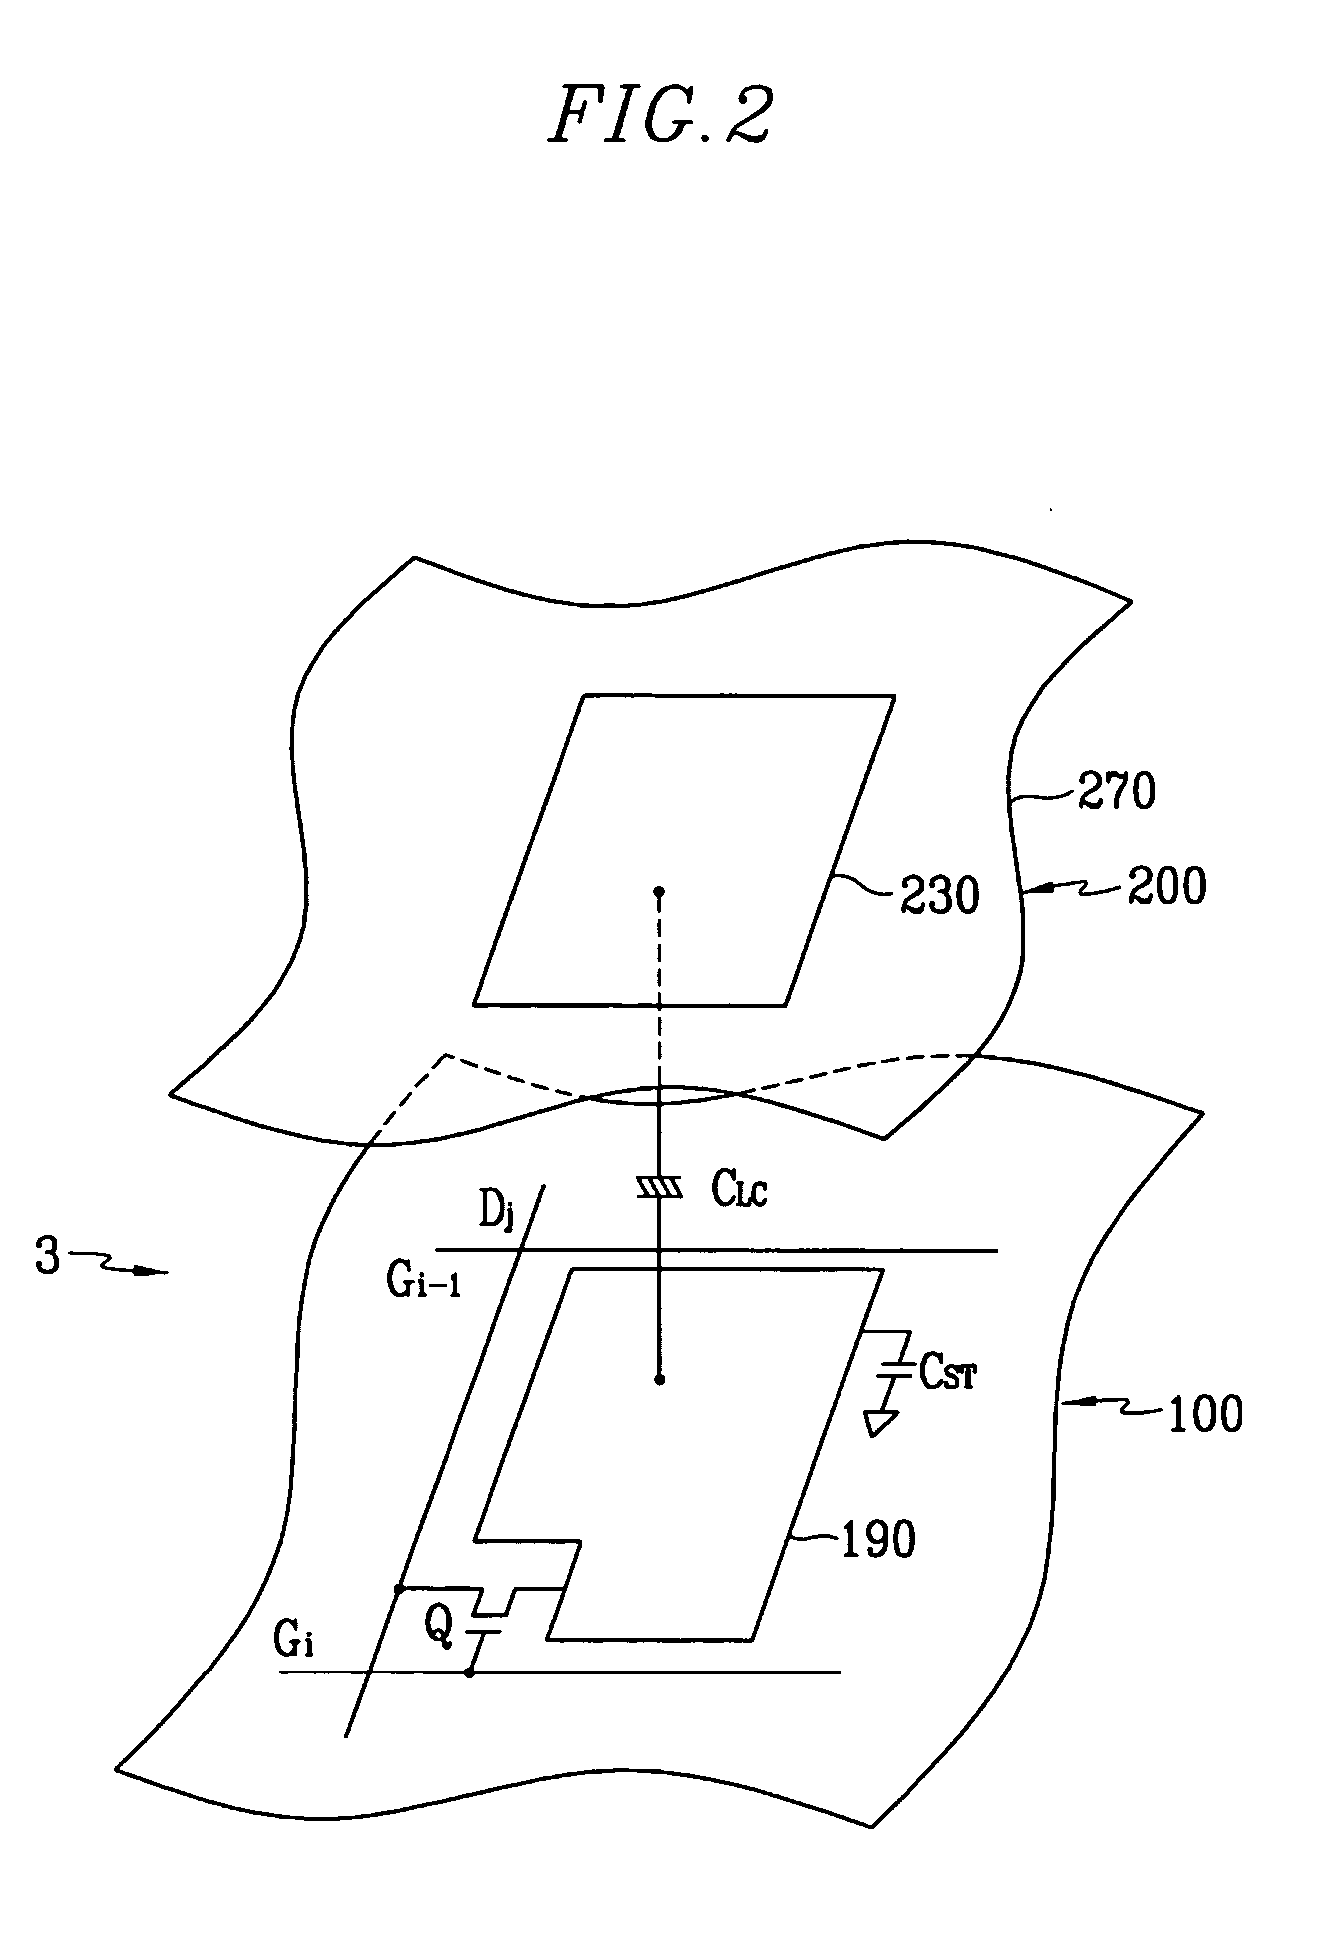 Display device and panel therefor